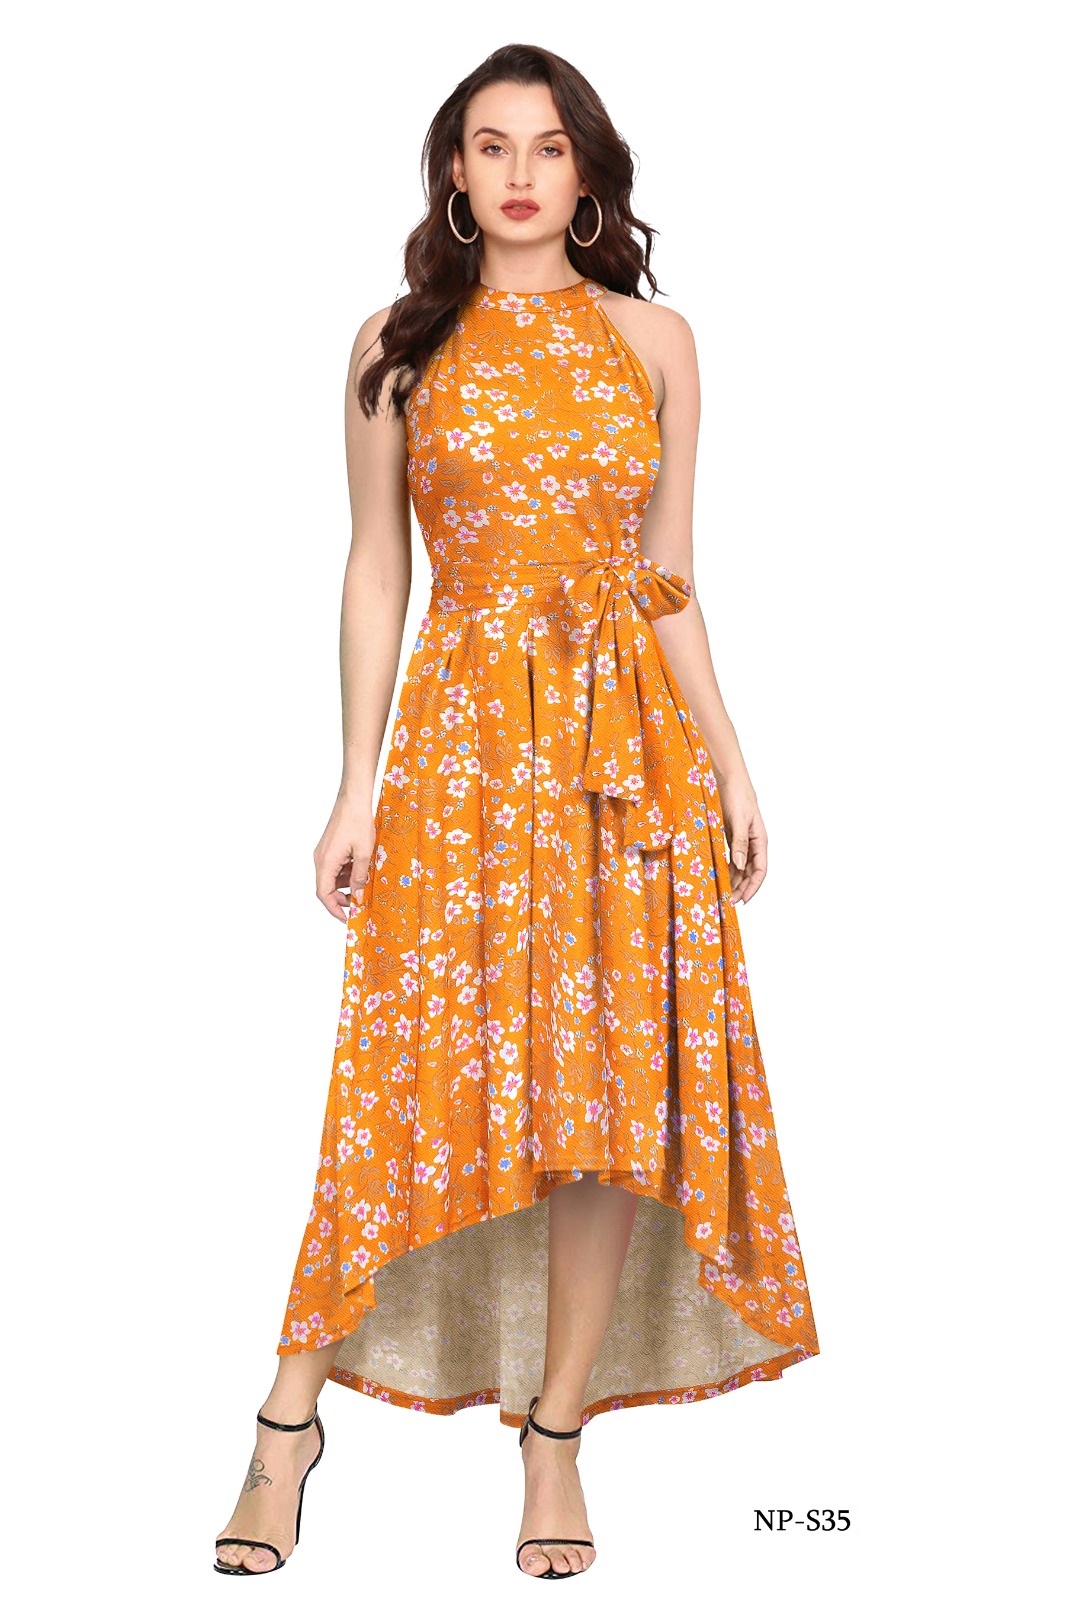  New Exclusive Designer Gown with Flower Print and Ajanta Fabric: full stitched